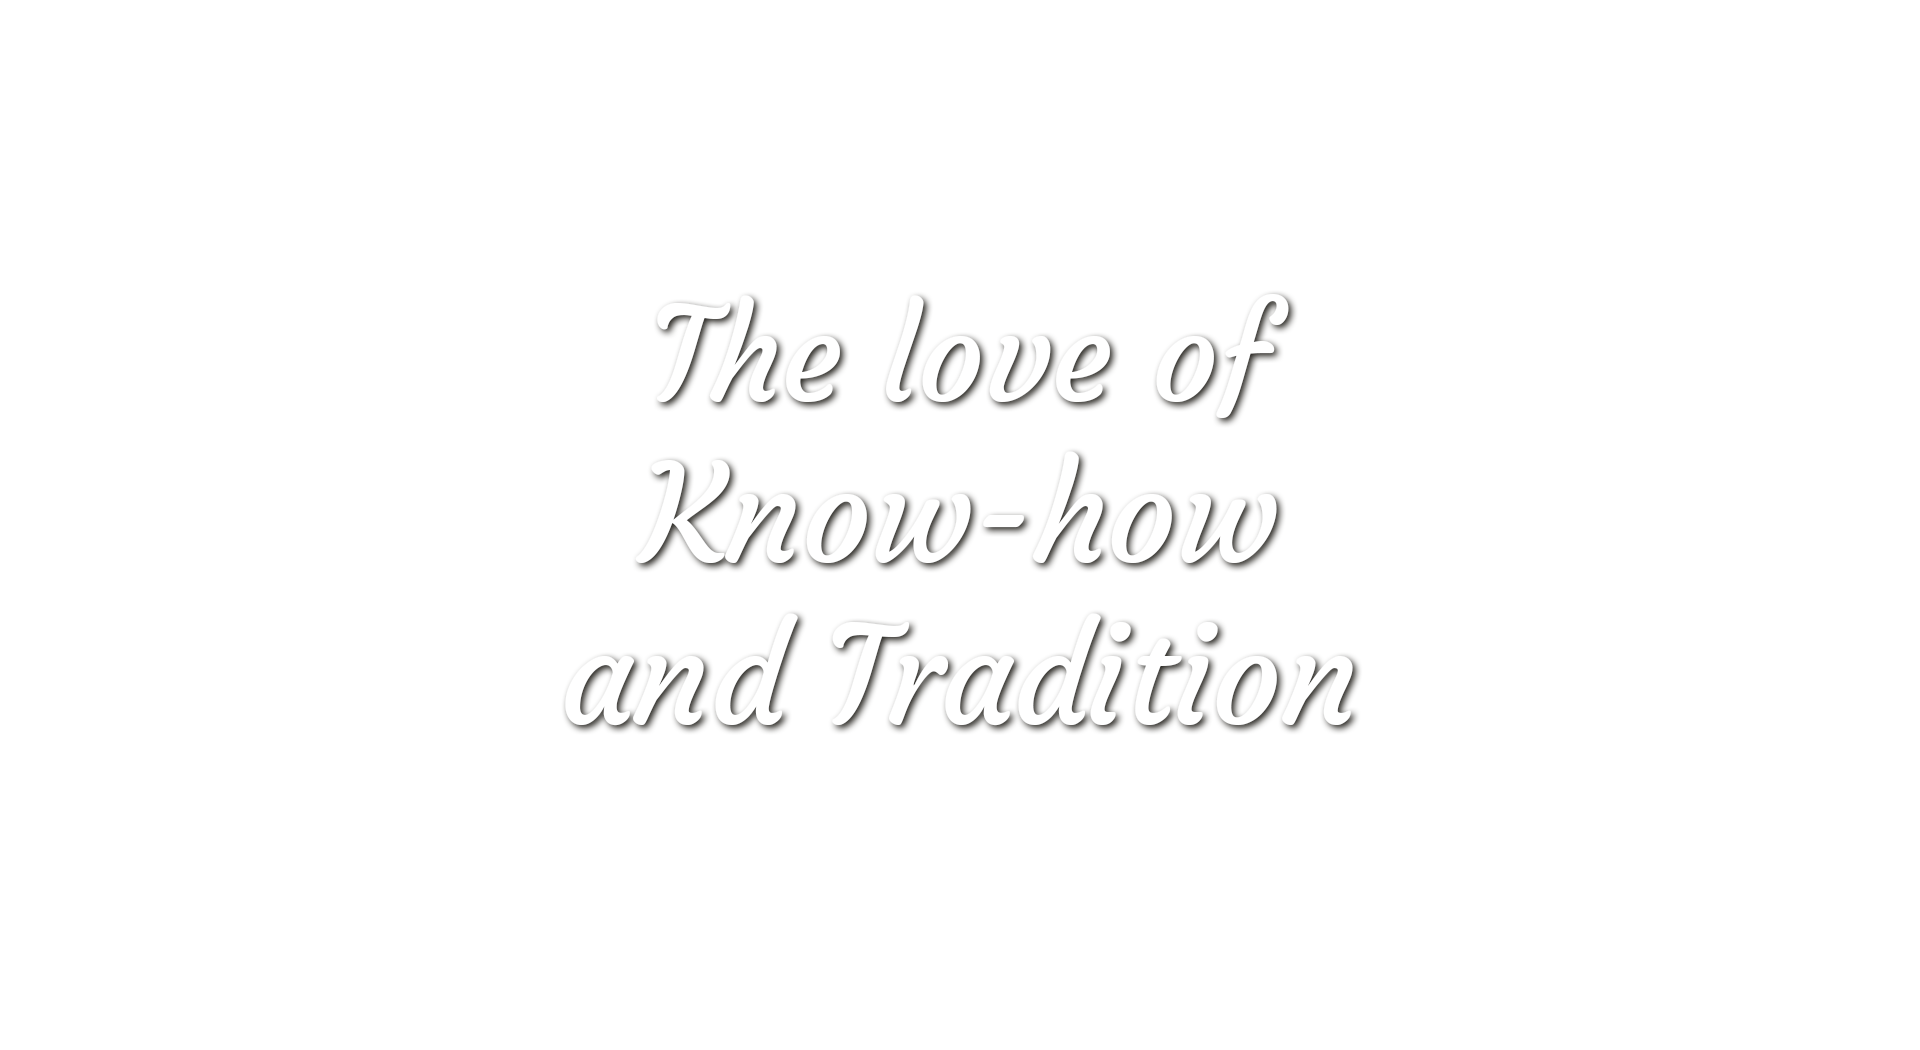 The love of know-how and tradition